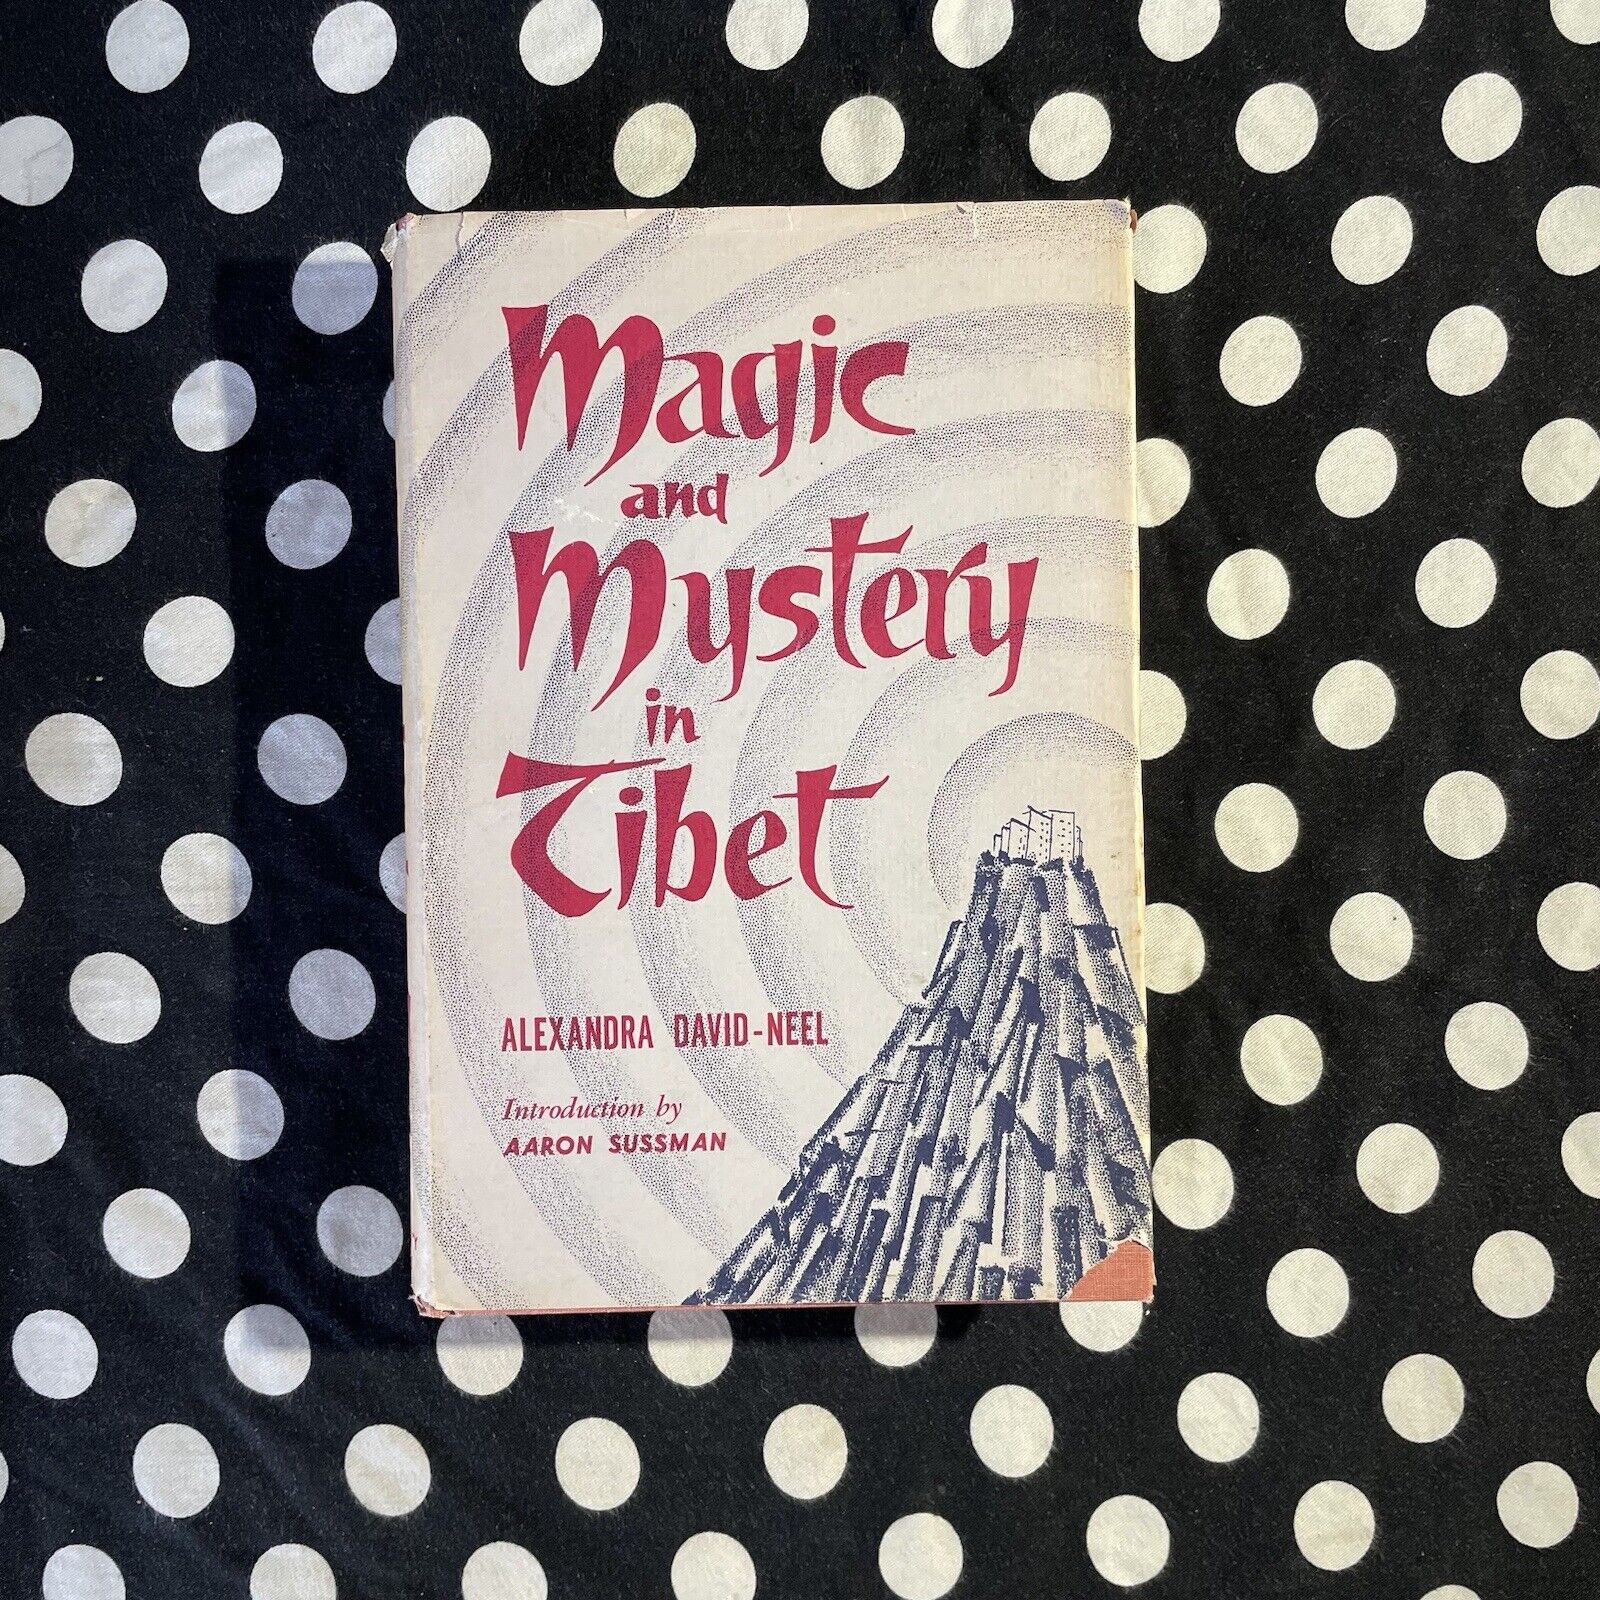 Magic and Mystery in Tibet by Alexandra David-Neel (1958 rare hardcover edition)